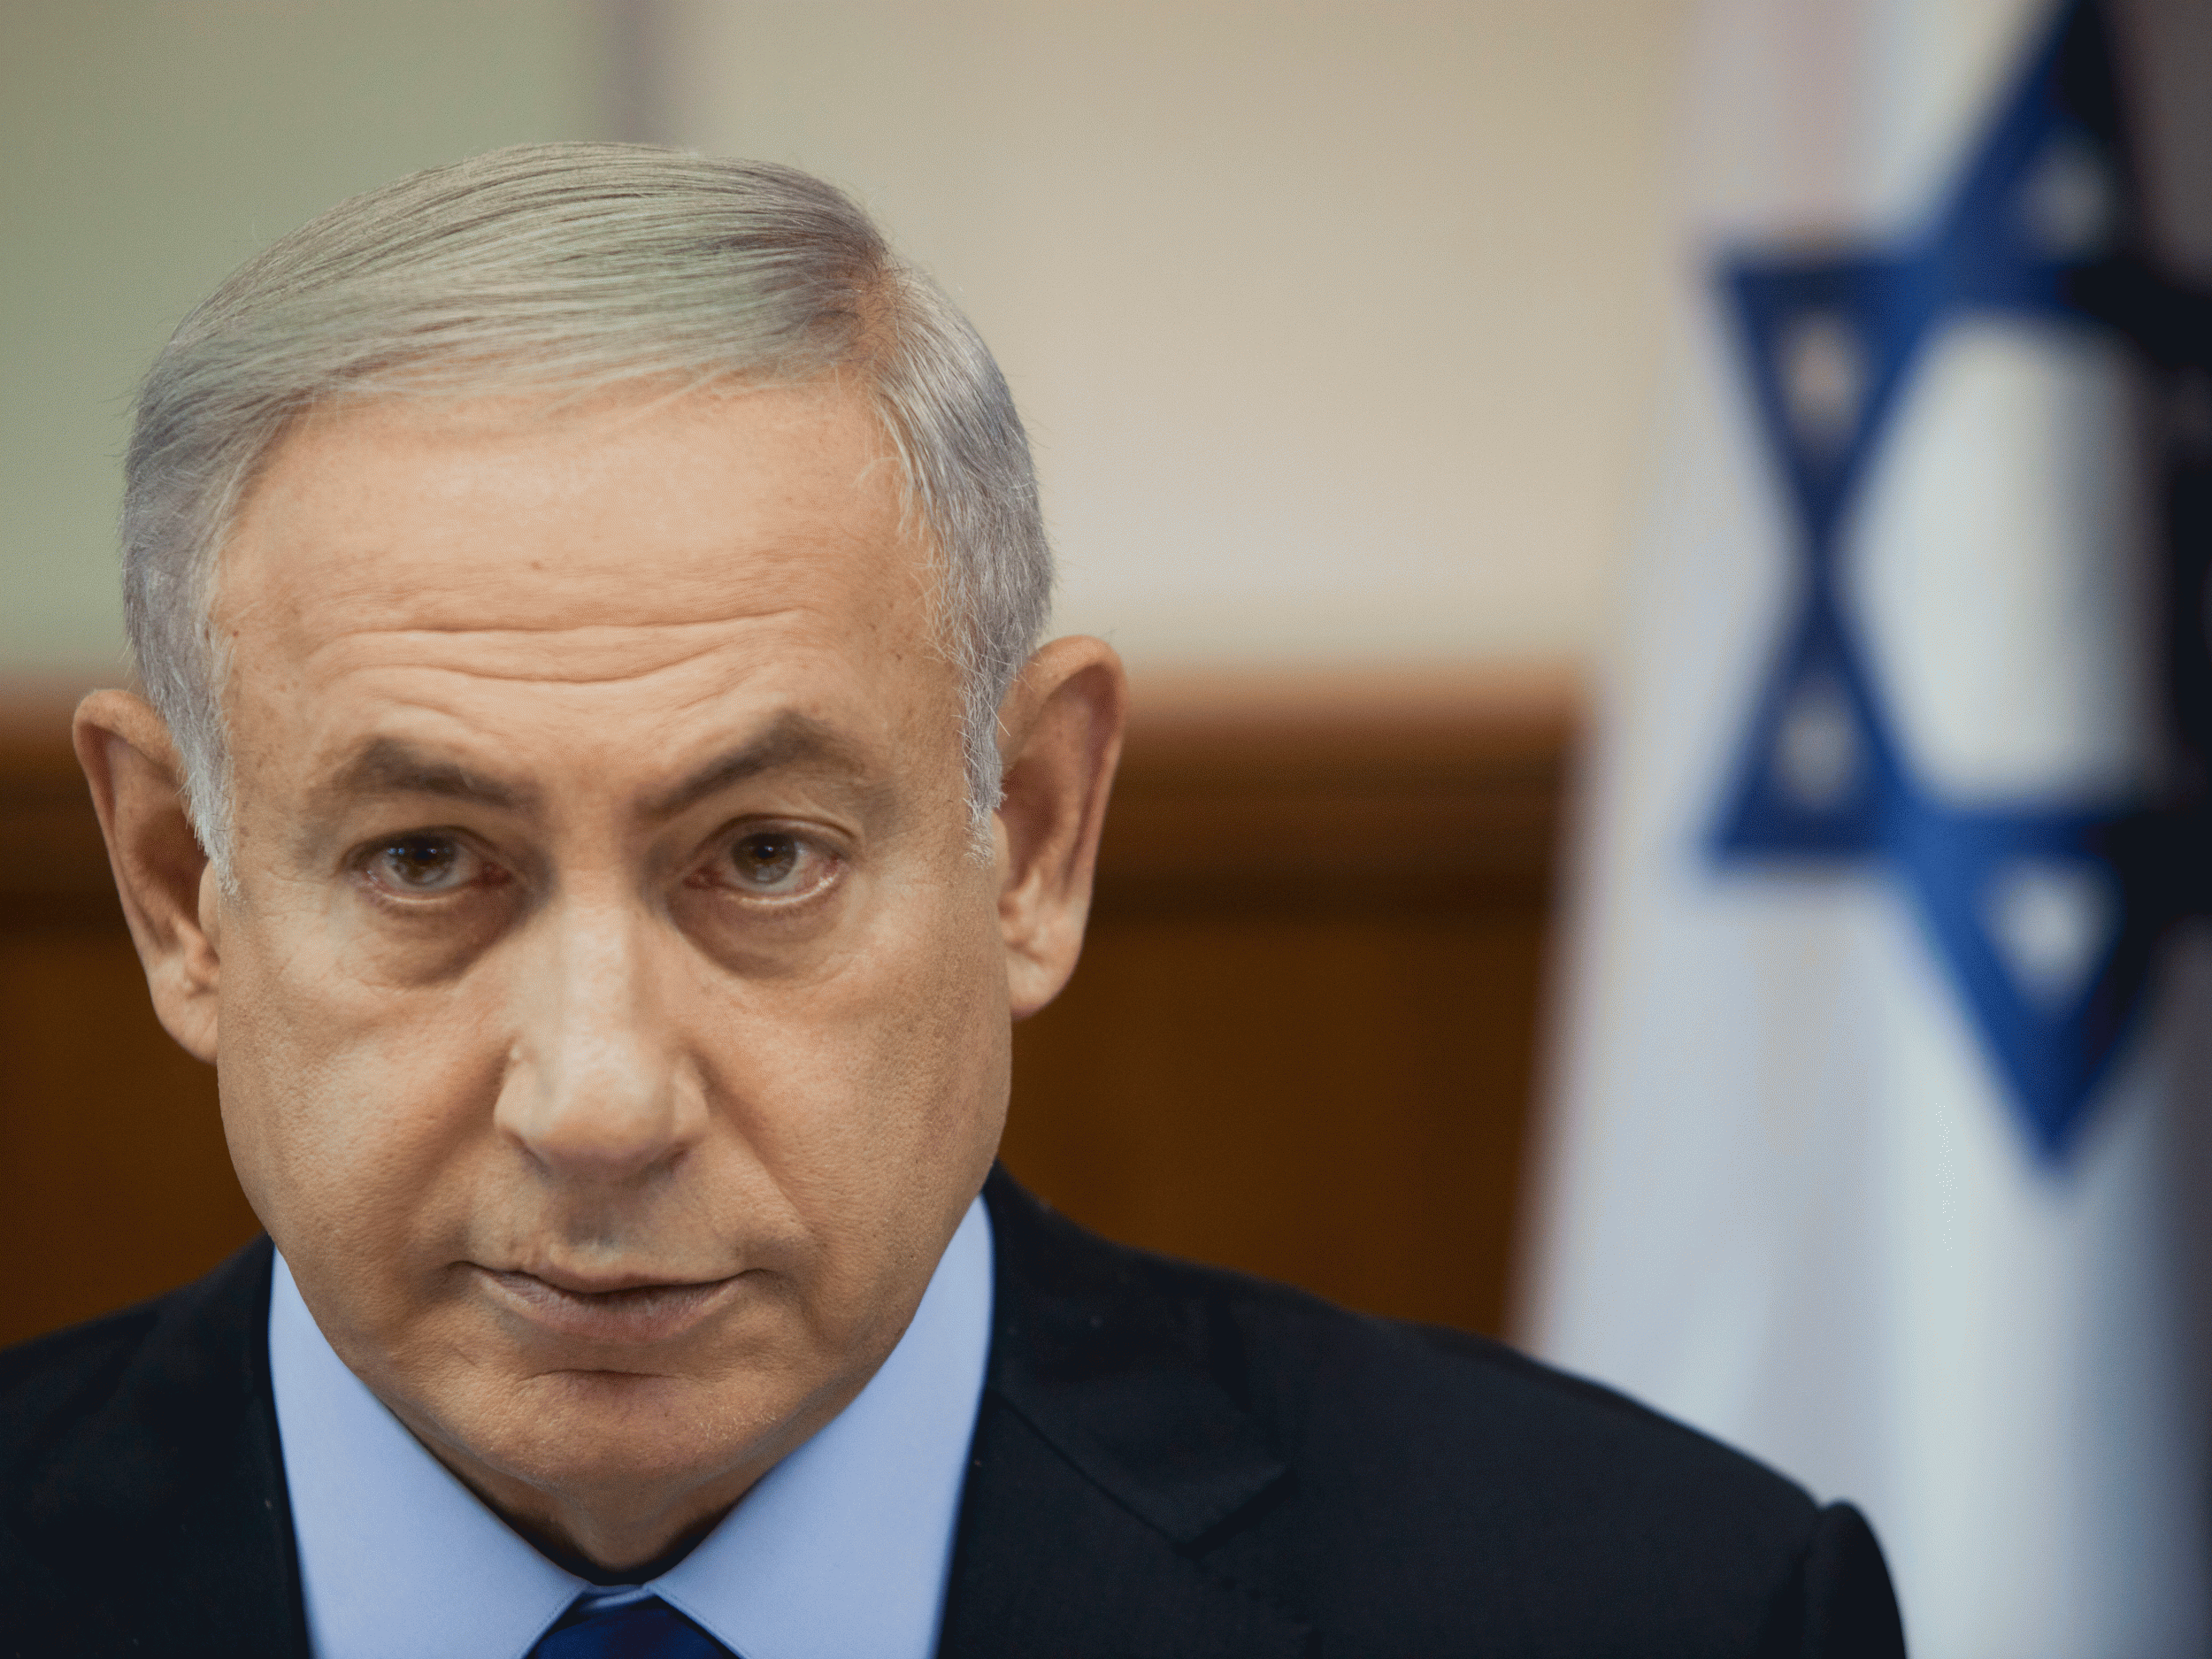 Israeli Prime Minister Benjamin Netanyahu angered many Palestinian-Israeli politicians and citizens over calls for anyone found guilty of arson to be stripped of their citizenship